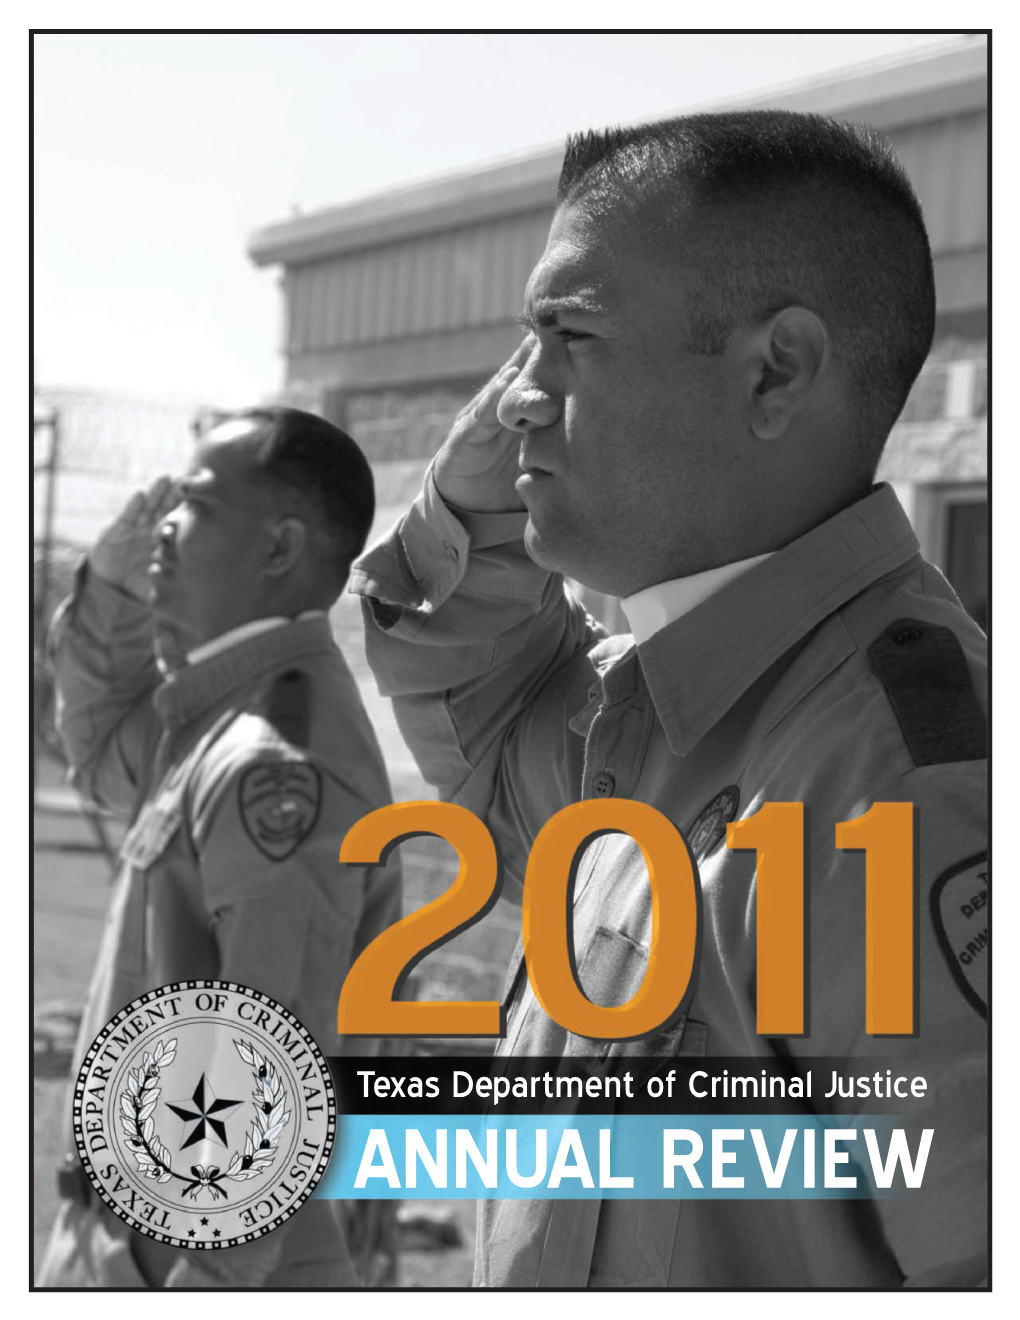 Texas Department of Criminal Justice (TDCJ) Annual Review 2011